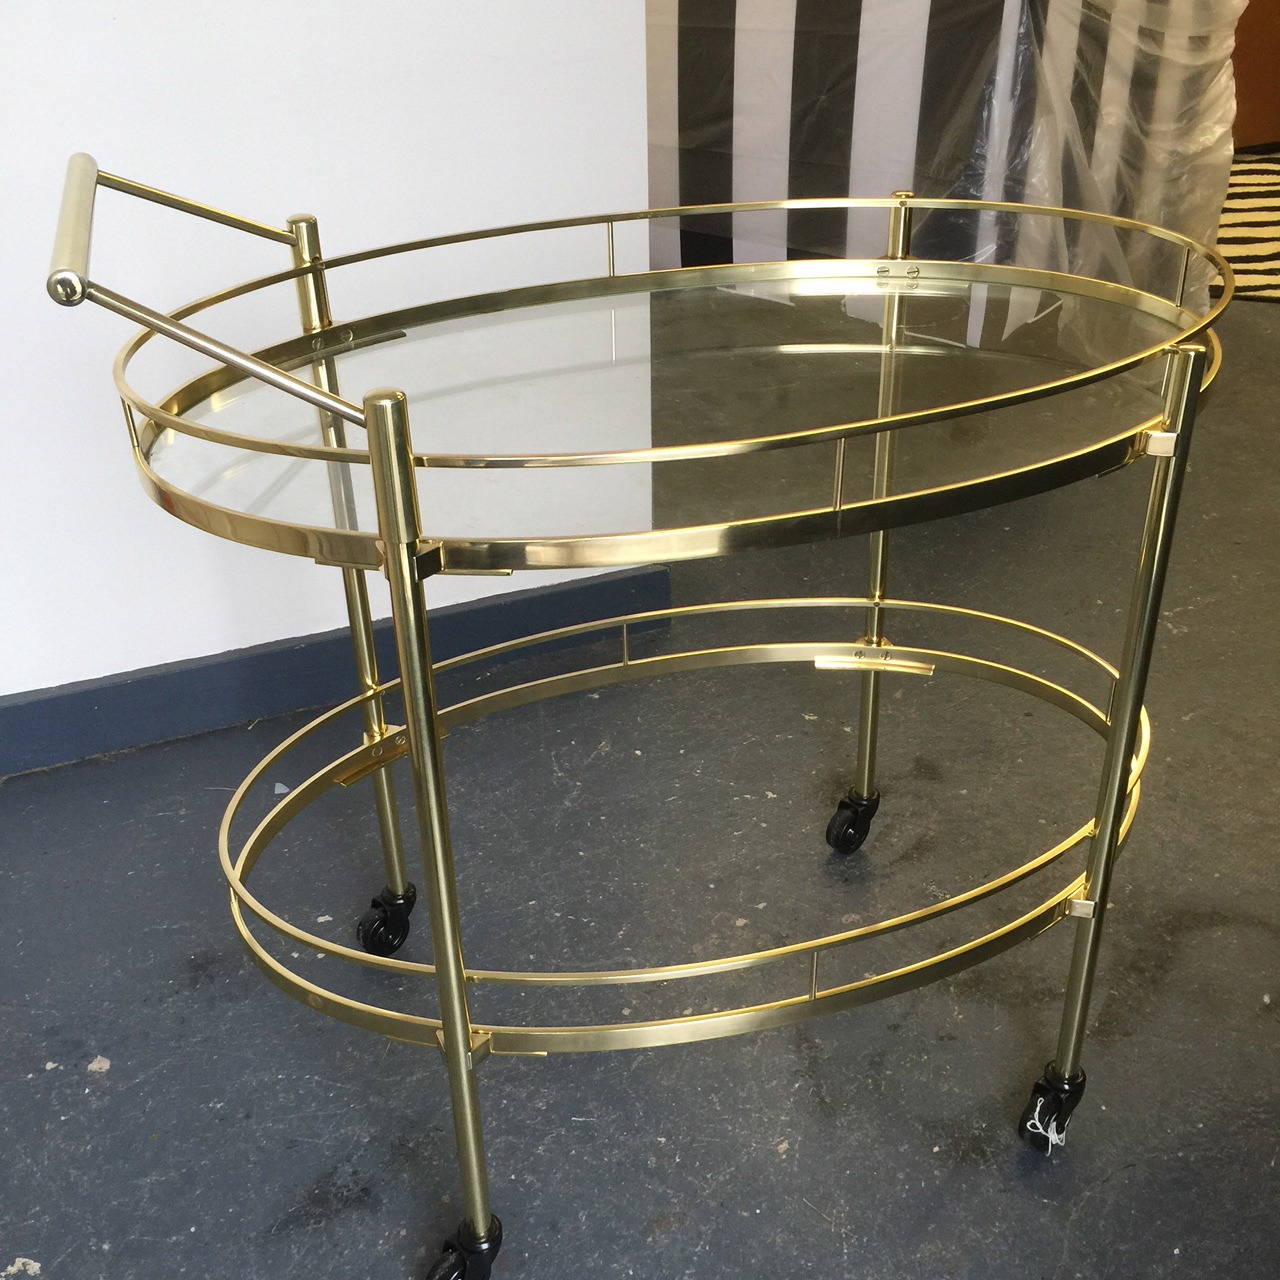 Solid brass bar cart on wheels.  Two oval shaped glass tiers.